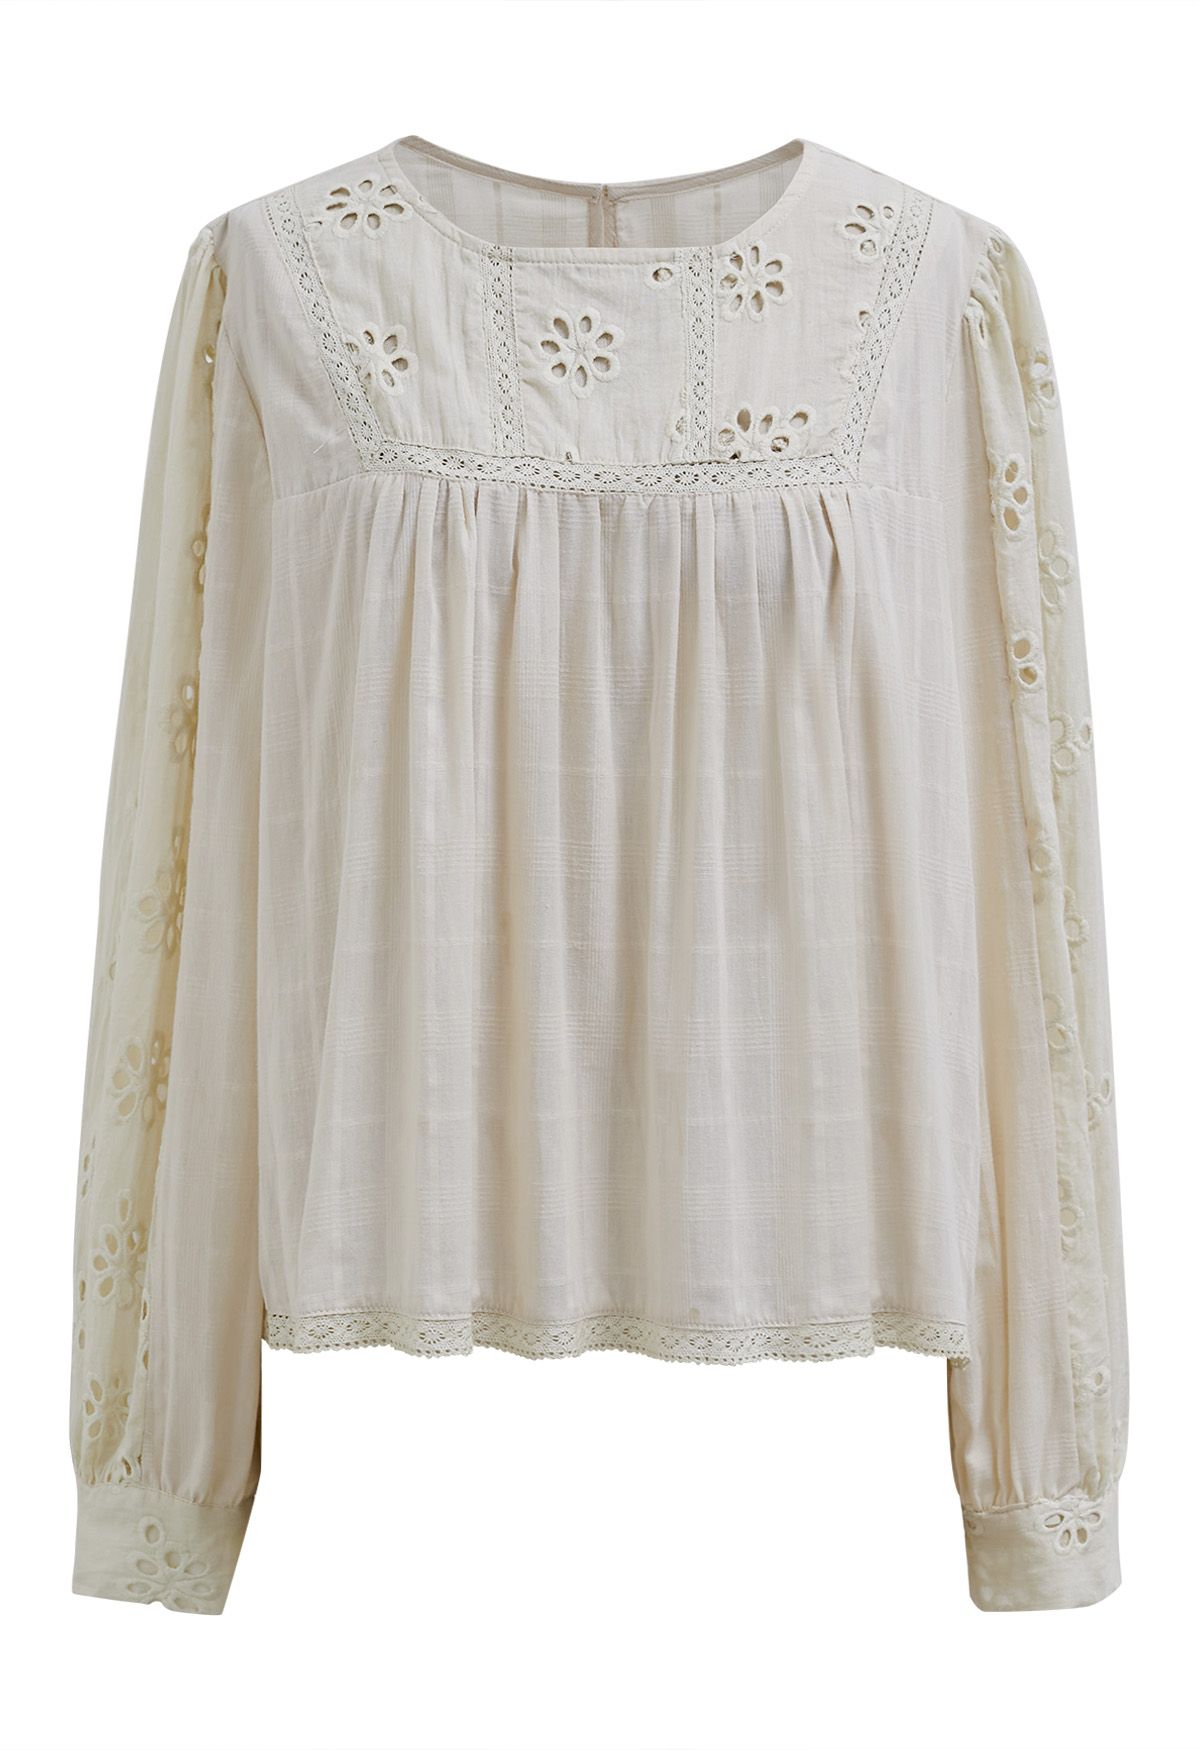 Daisy Eyelet Embroidery Cotton Top in Cream